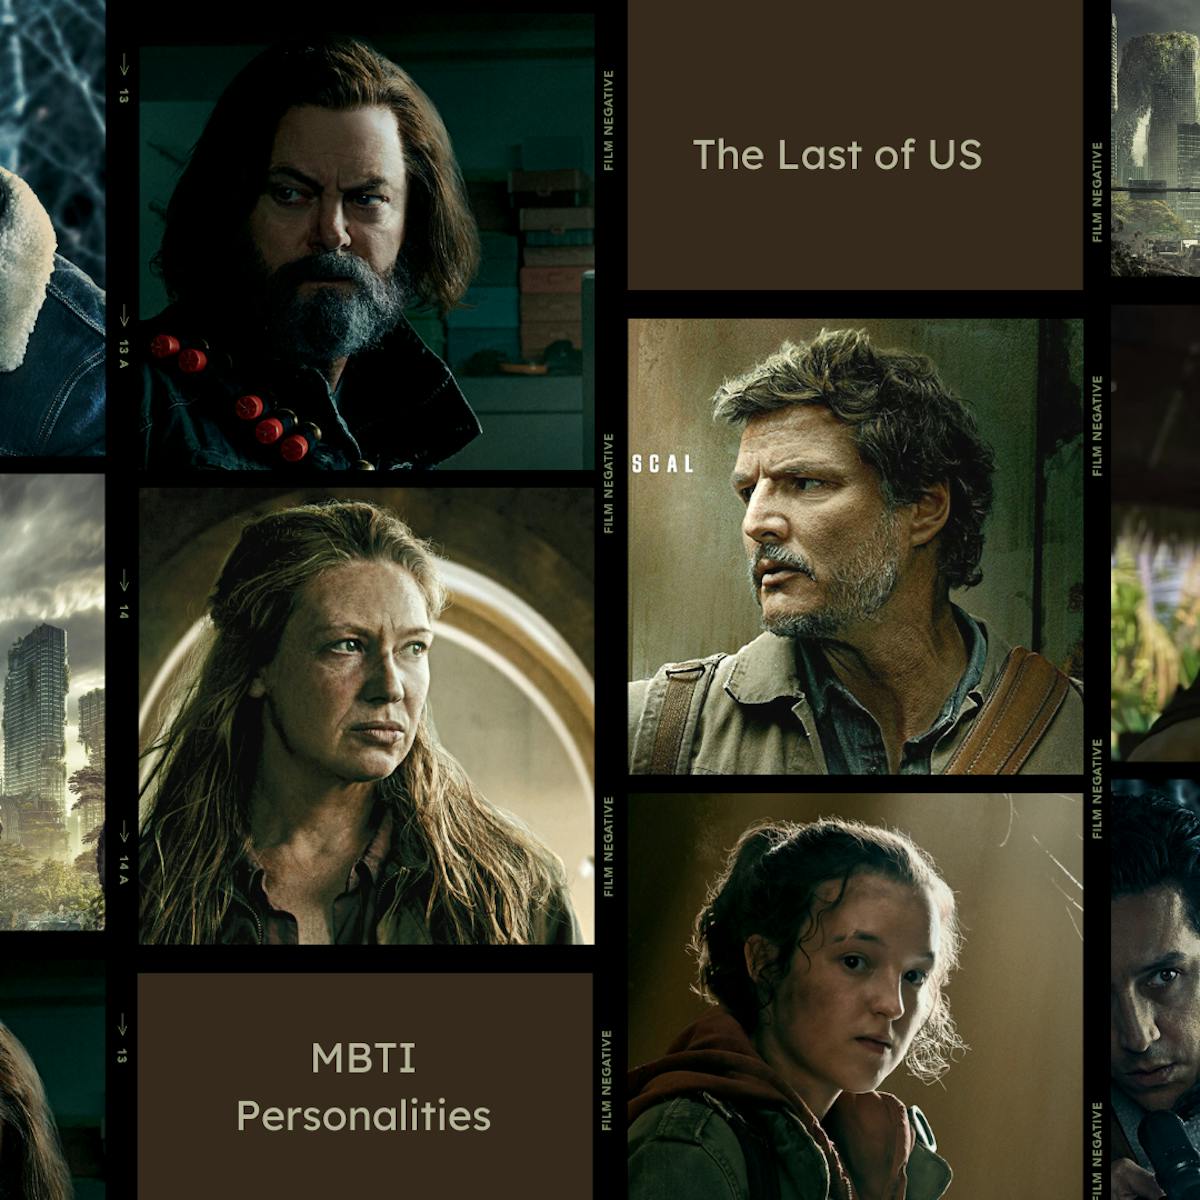 The Last of US MBTI Personality Types